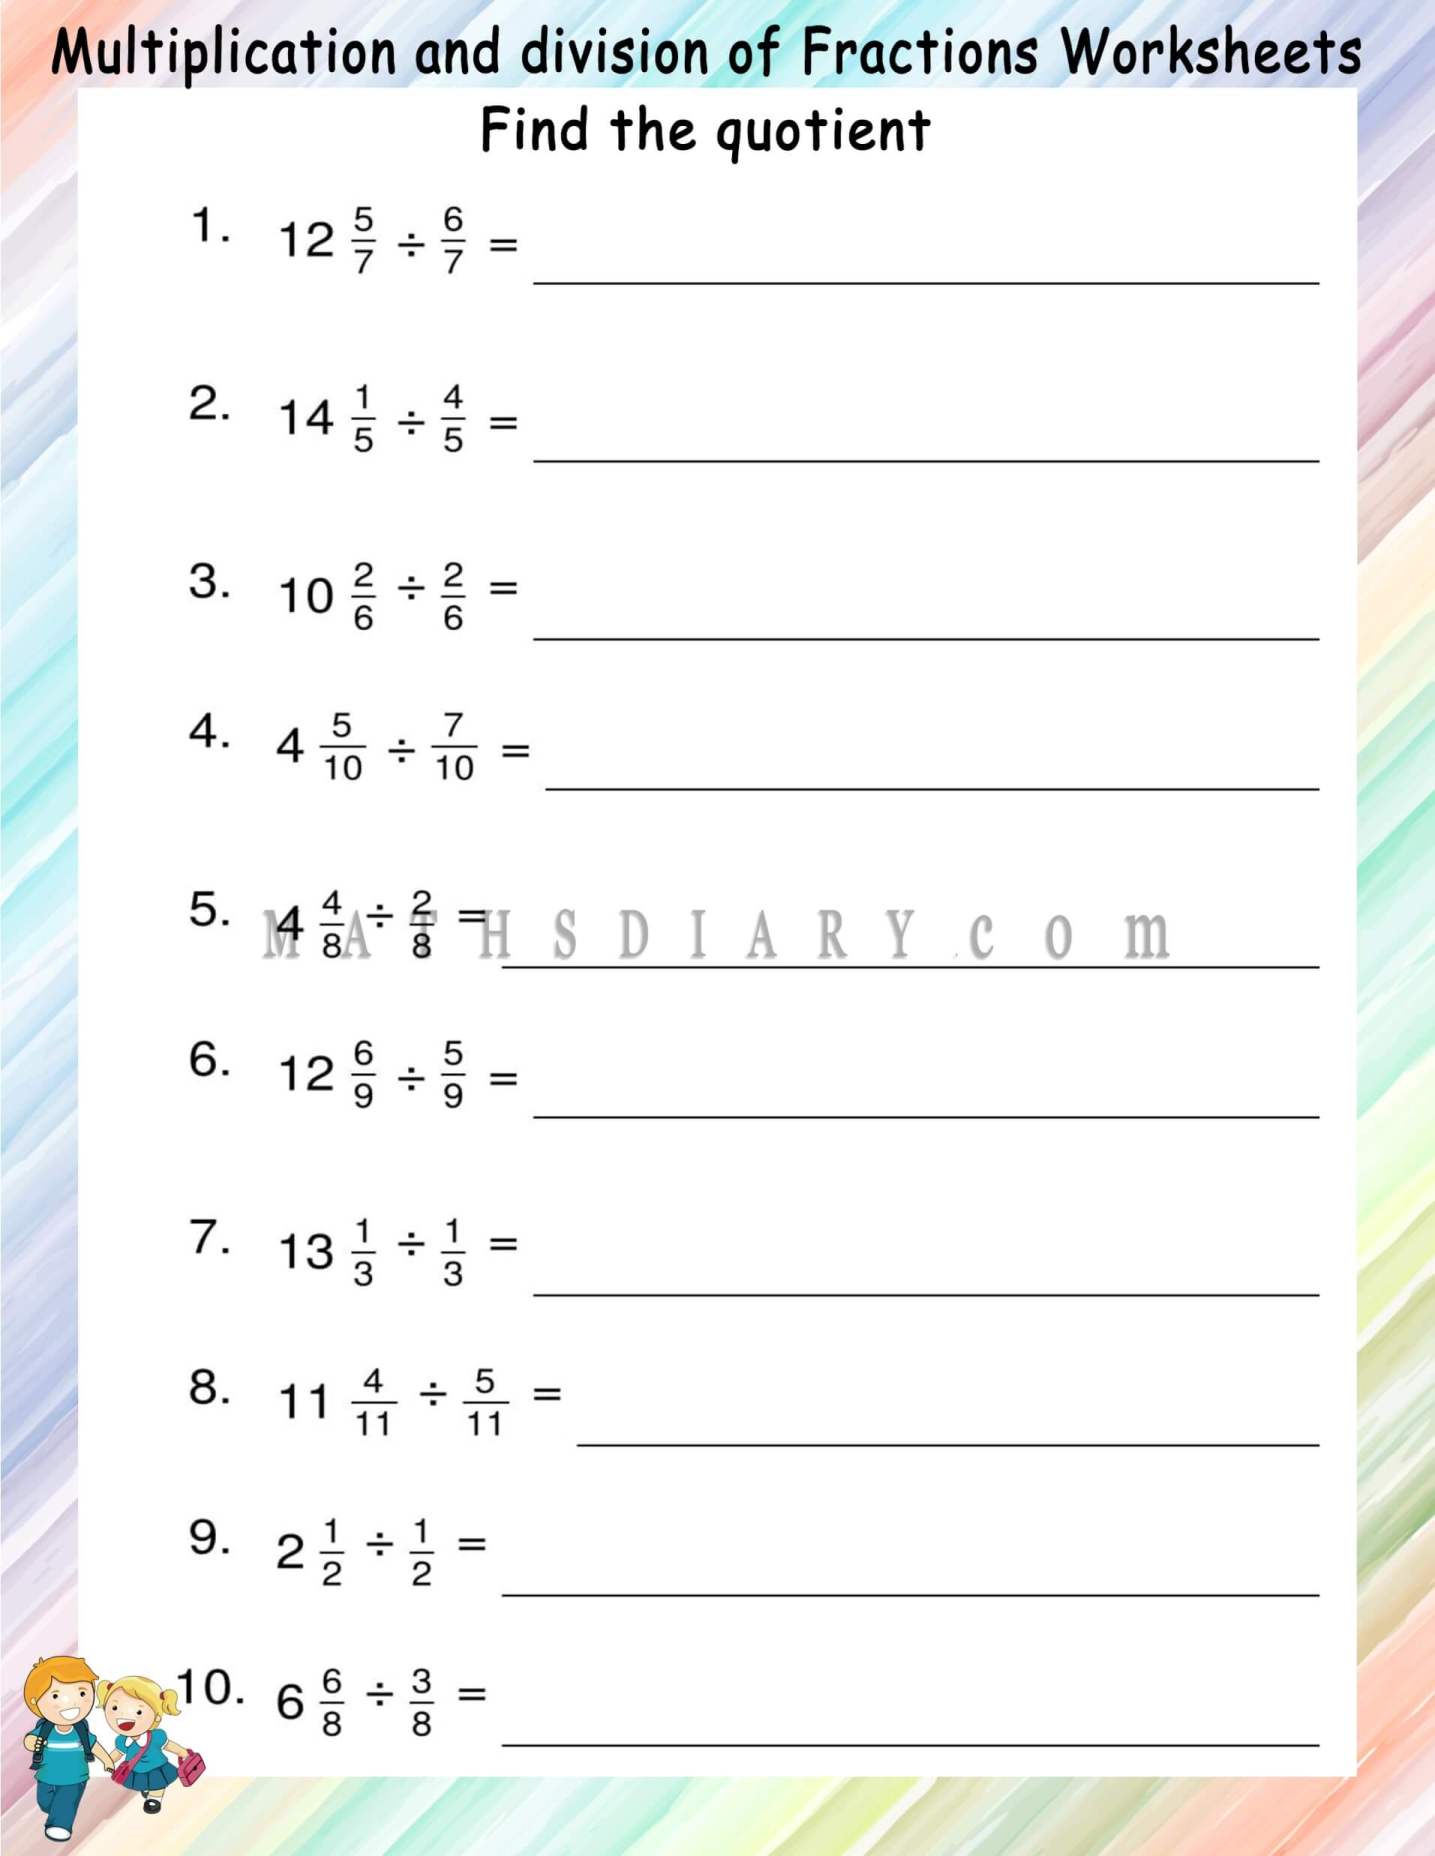 Dividing whole number by fractions worksheets - Math Worksheets ...